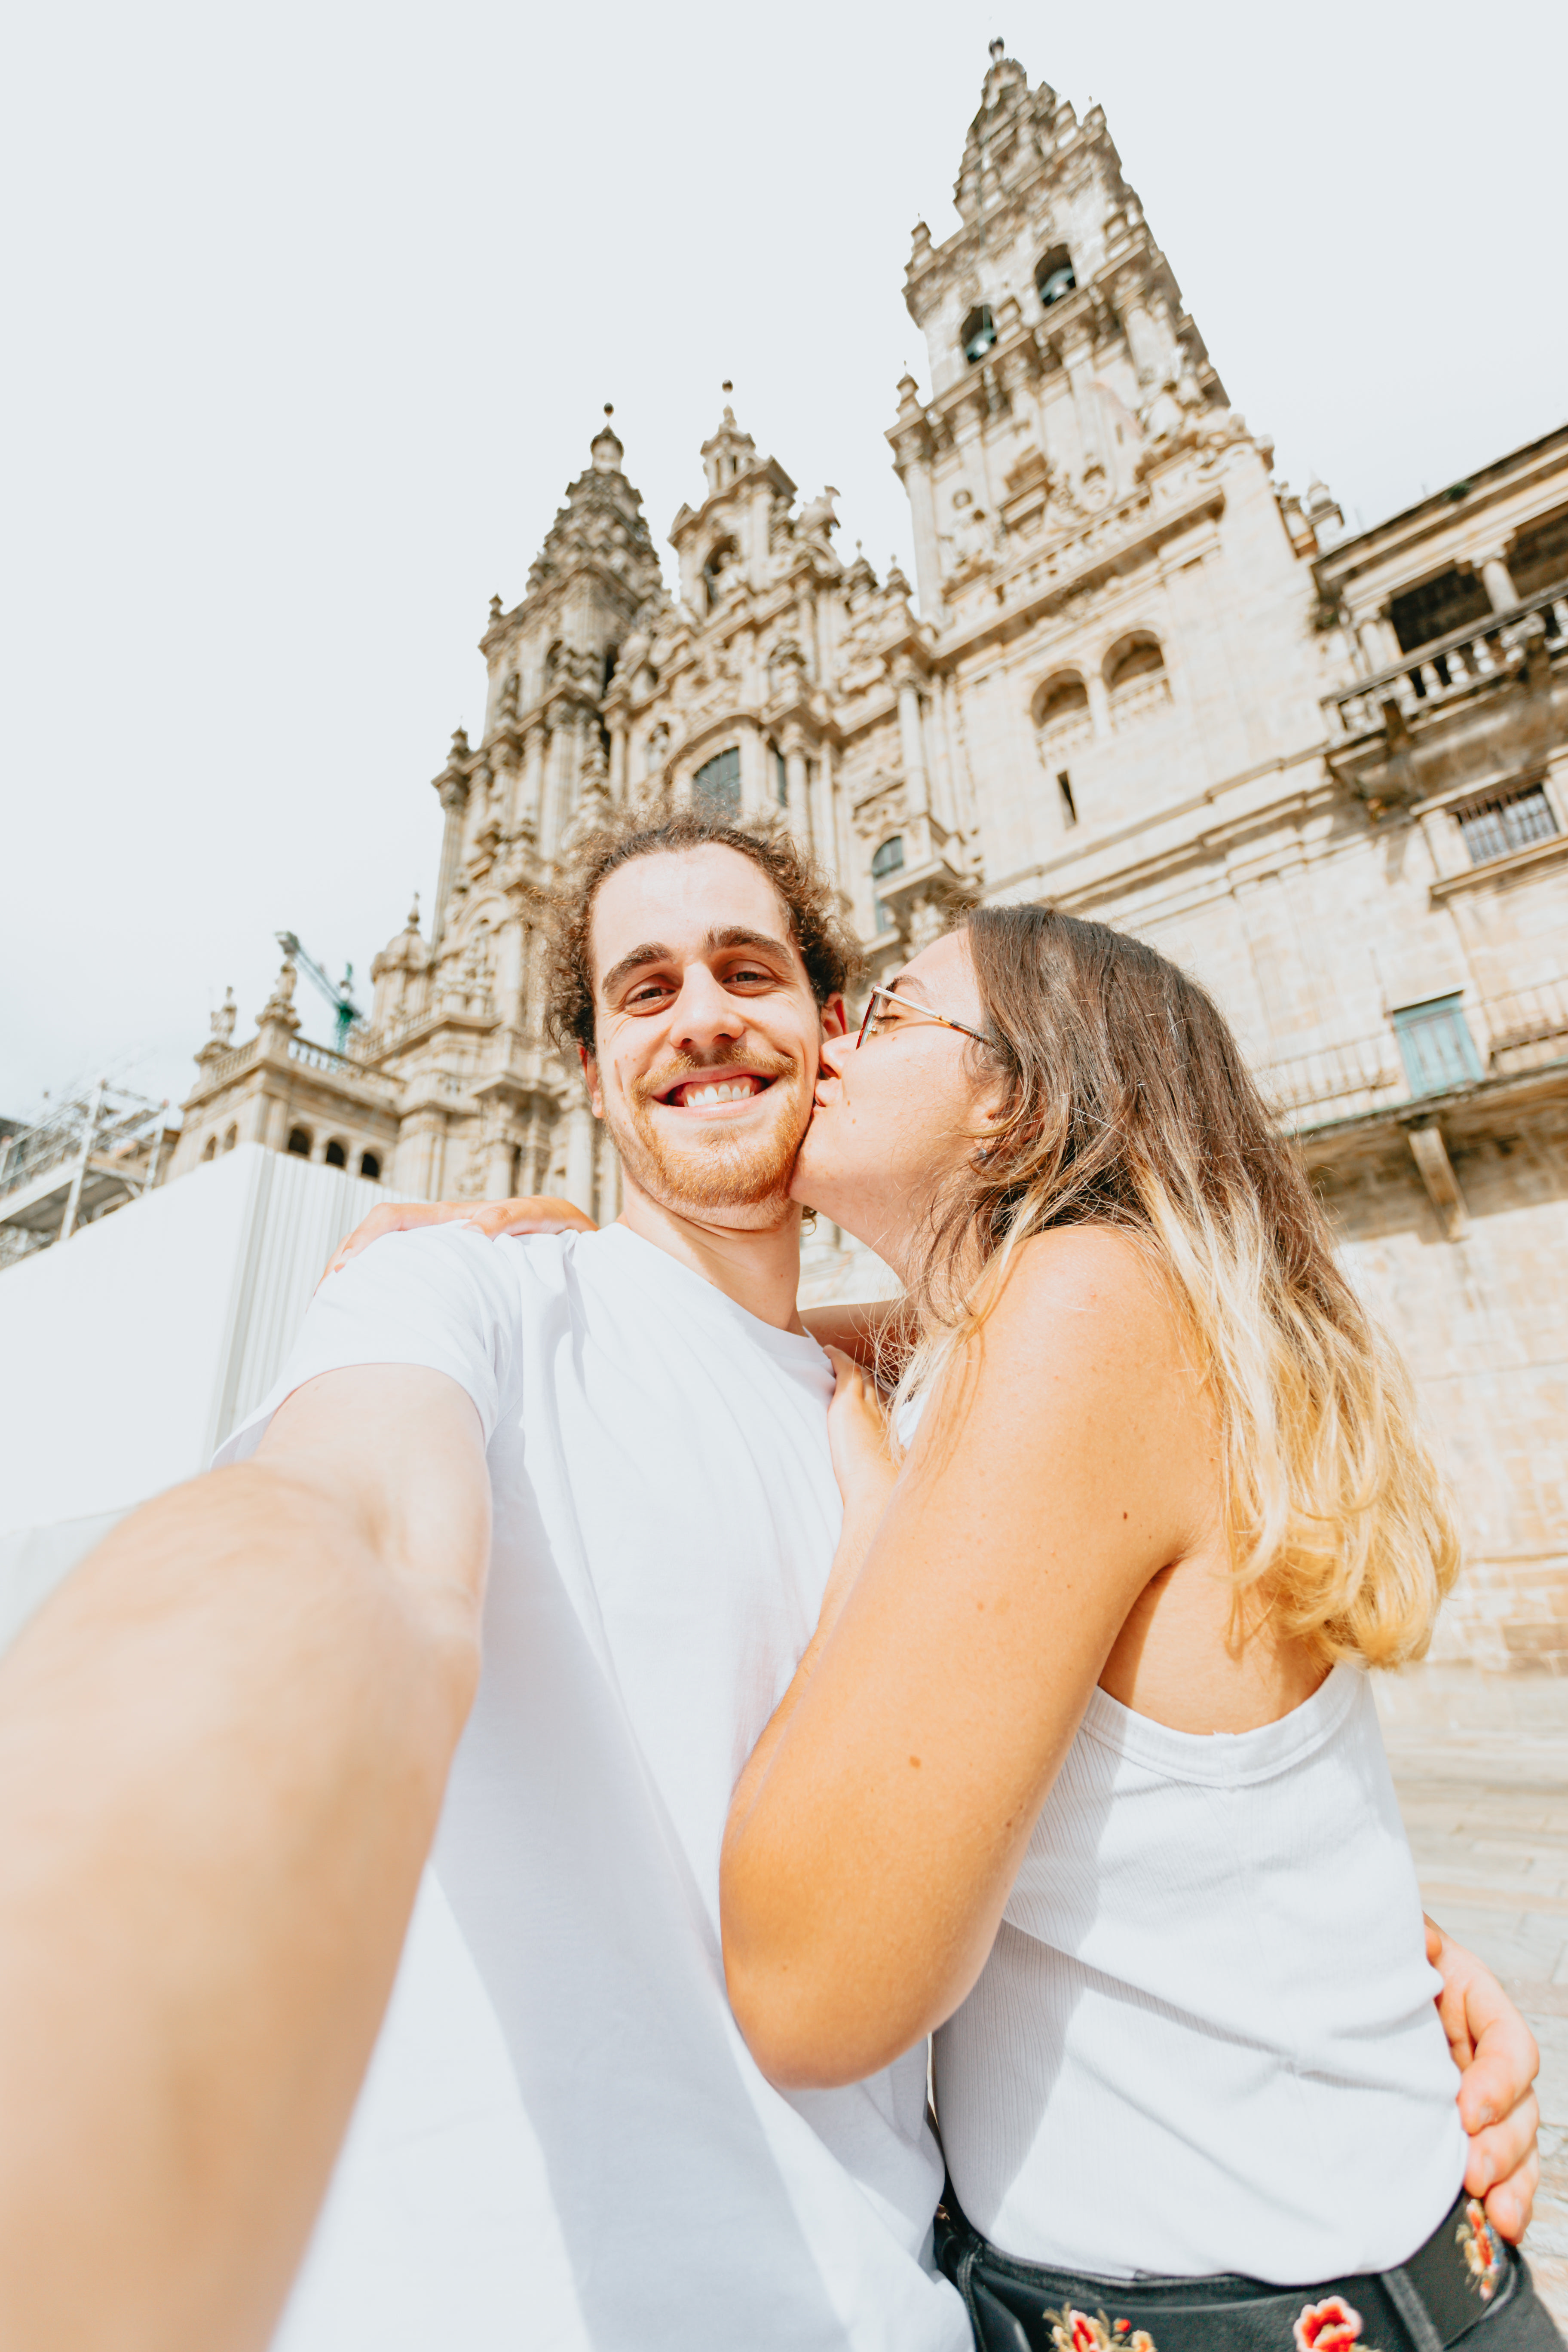 Kissing Selfie Stock Images and Photos - PeopleImages